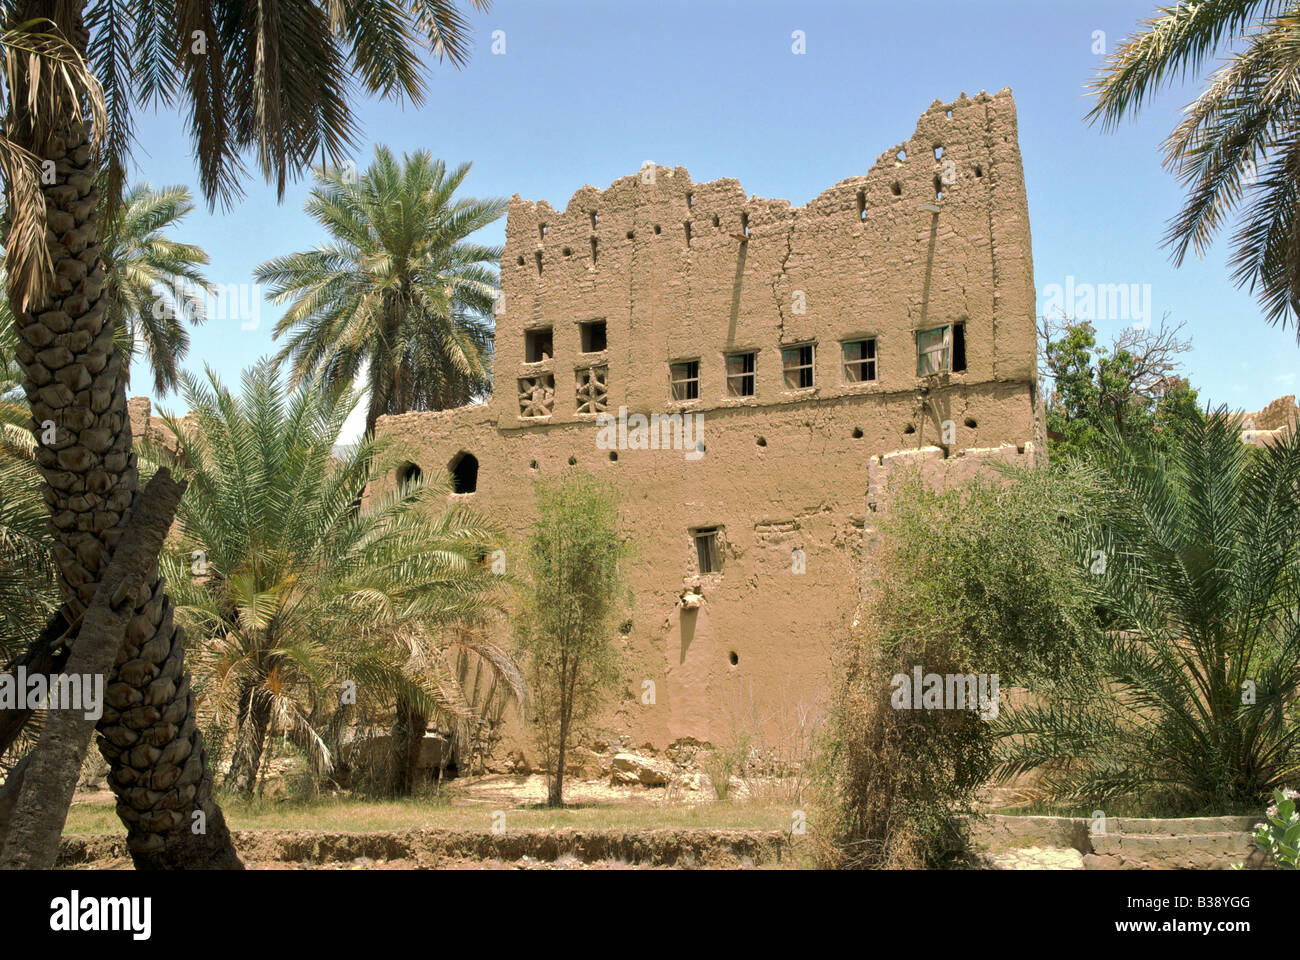 Typical two storied clay and wood house in decay Al Hamra Al Dakhiliyah Region Sultanate of Oman Stock Photo